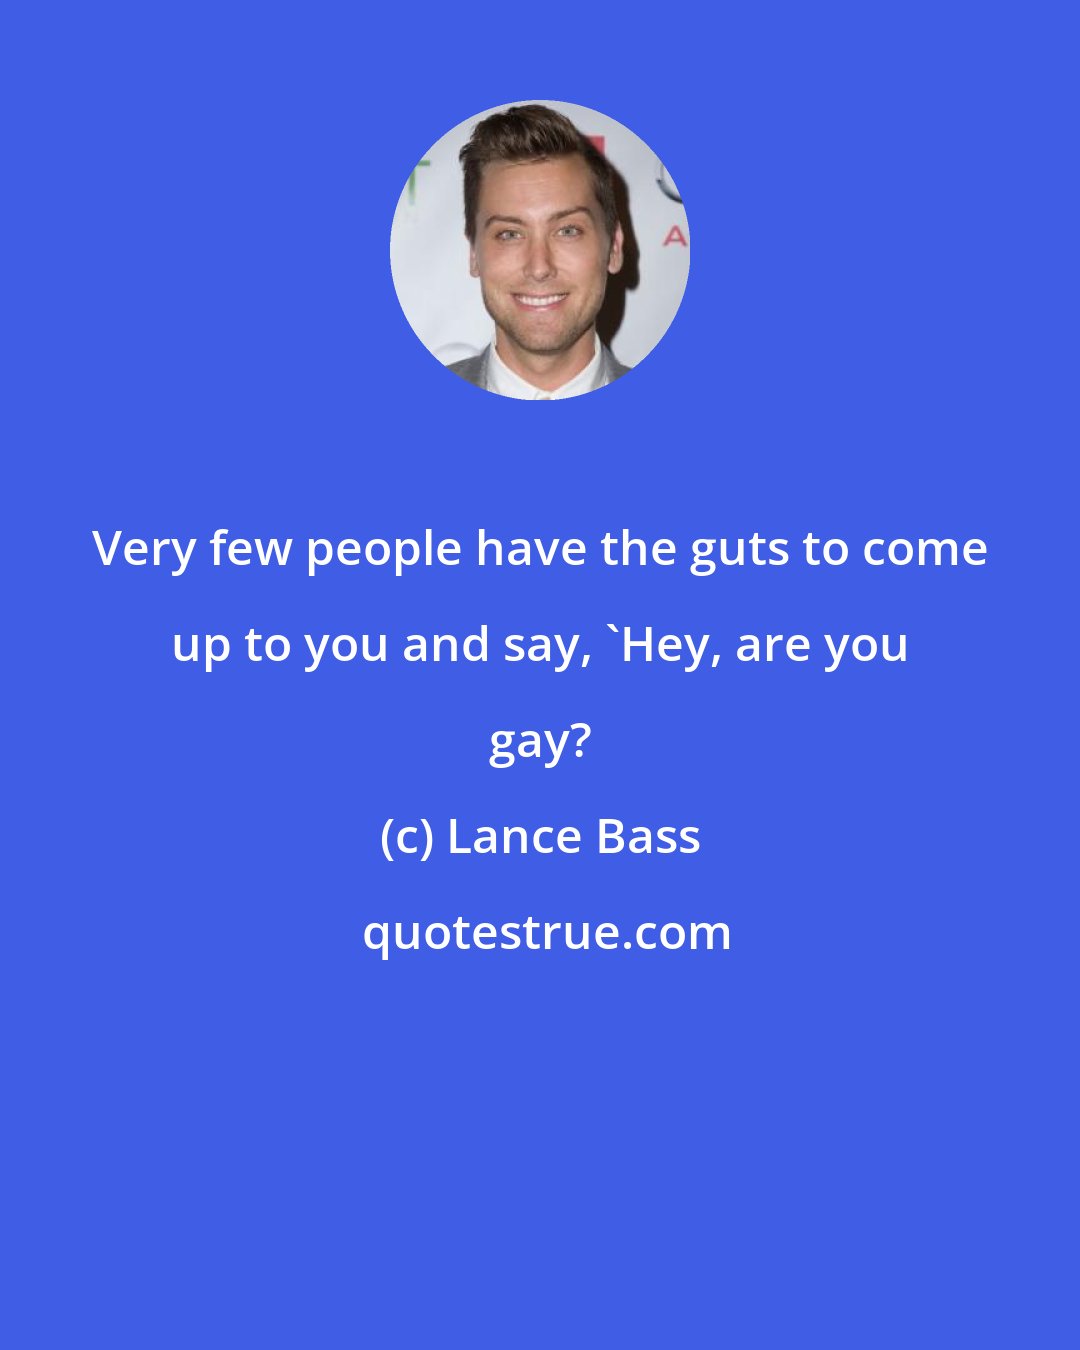 Lance Bass: Very few people have the guts to come up to you and say, 'Hey, are you gay?